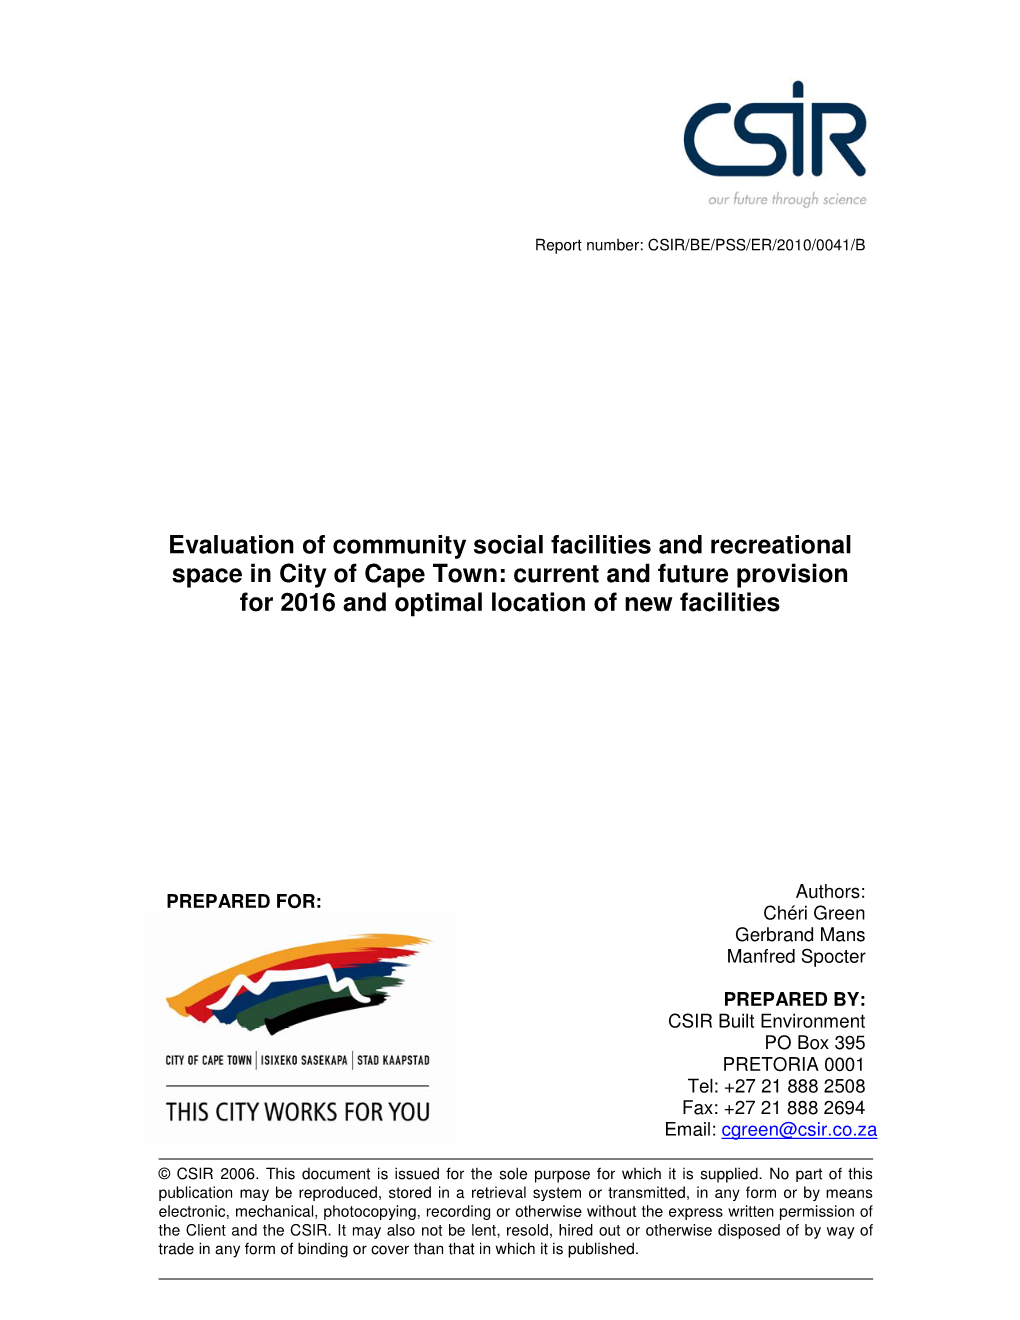 Evaluation of Community Social Facilities and Recreational Space in City of Cape Town: Current and Future Provision for 2016 and Optimal Location of New Facilities